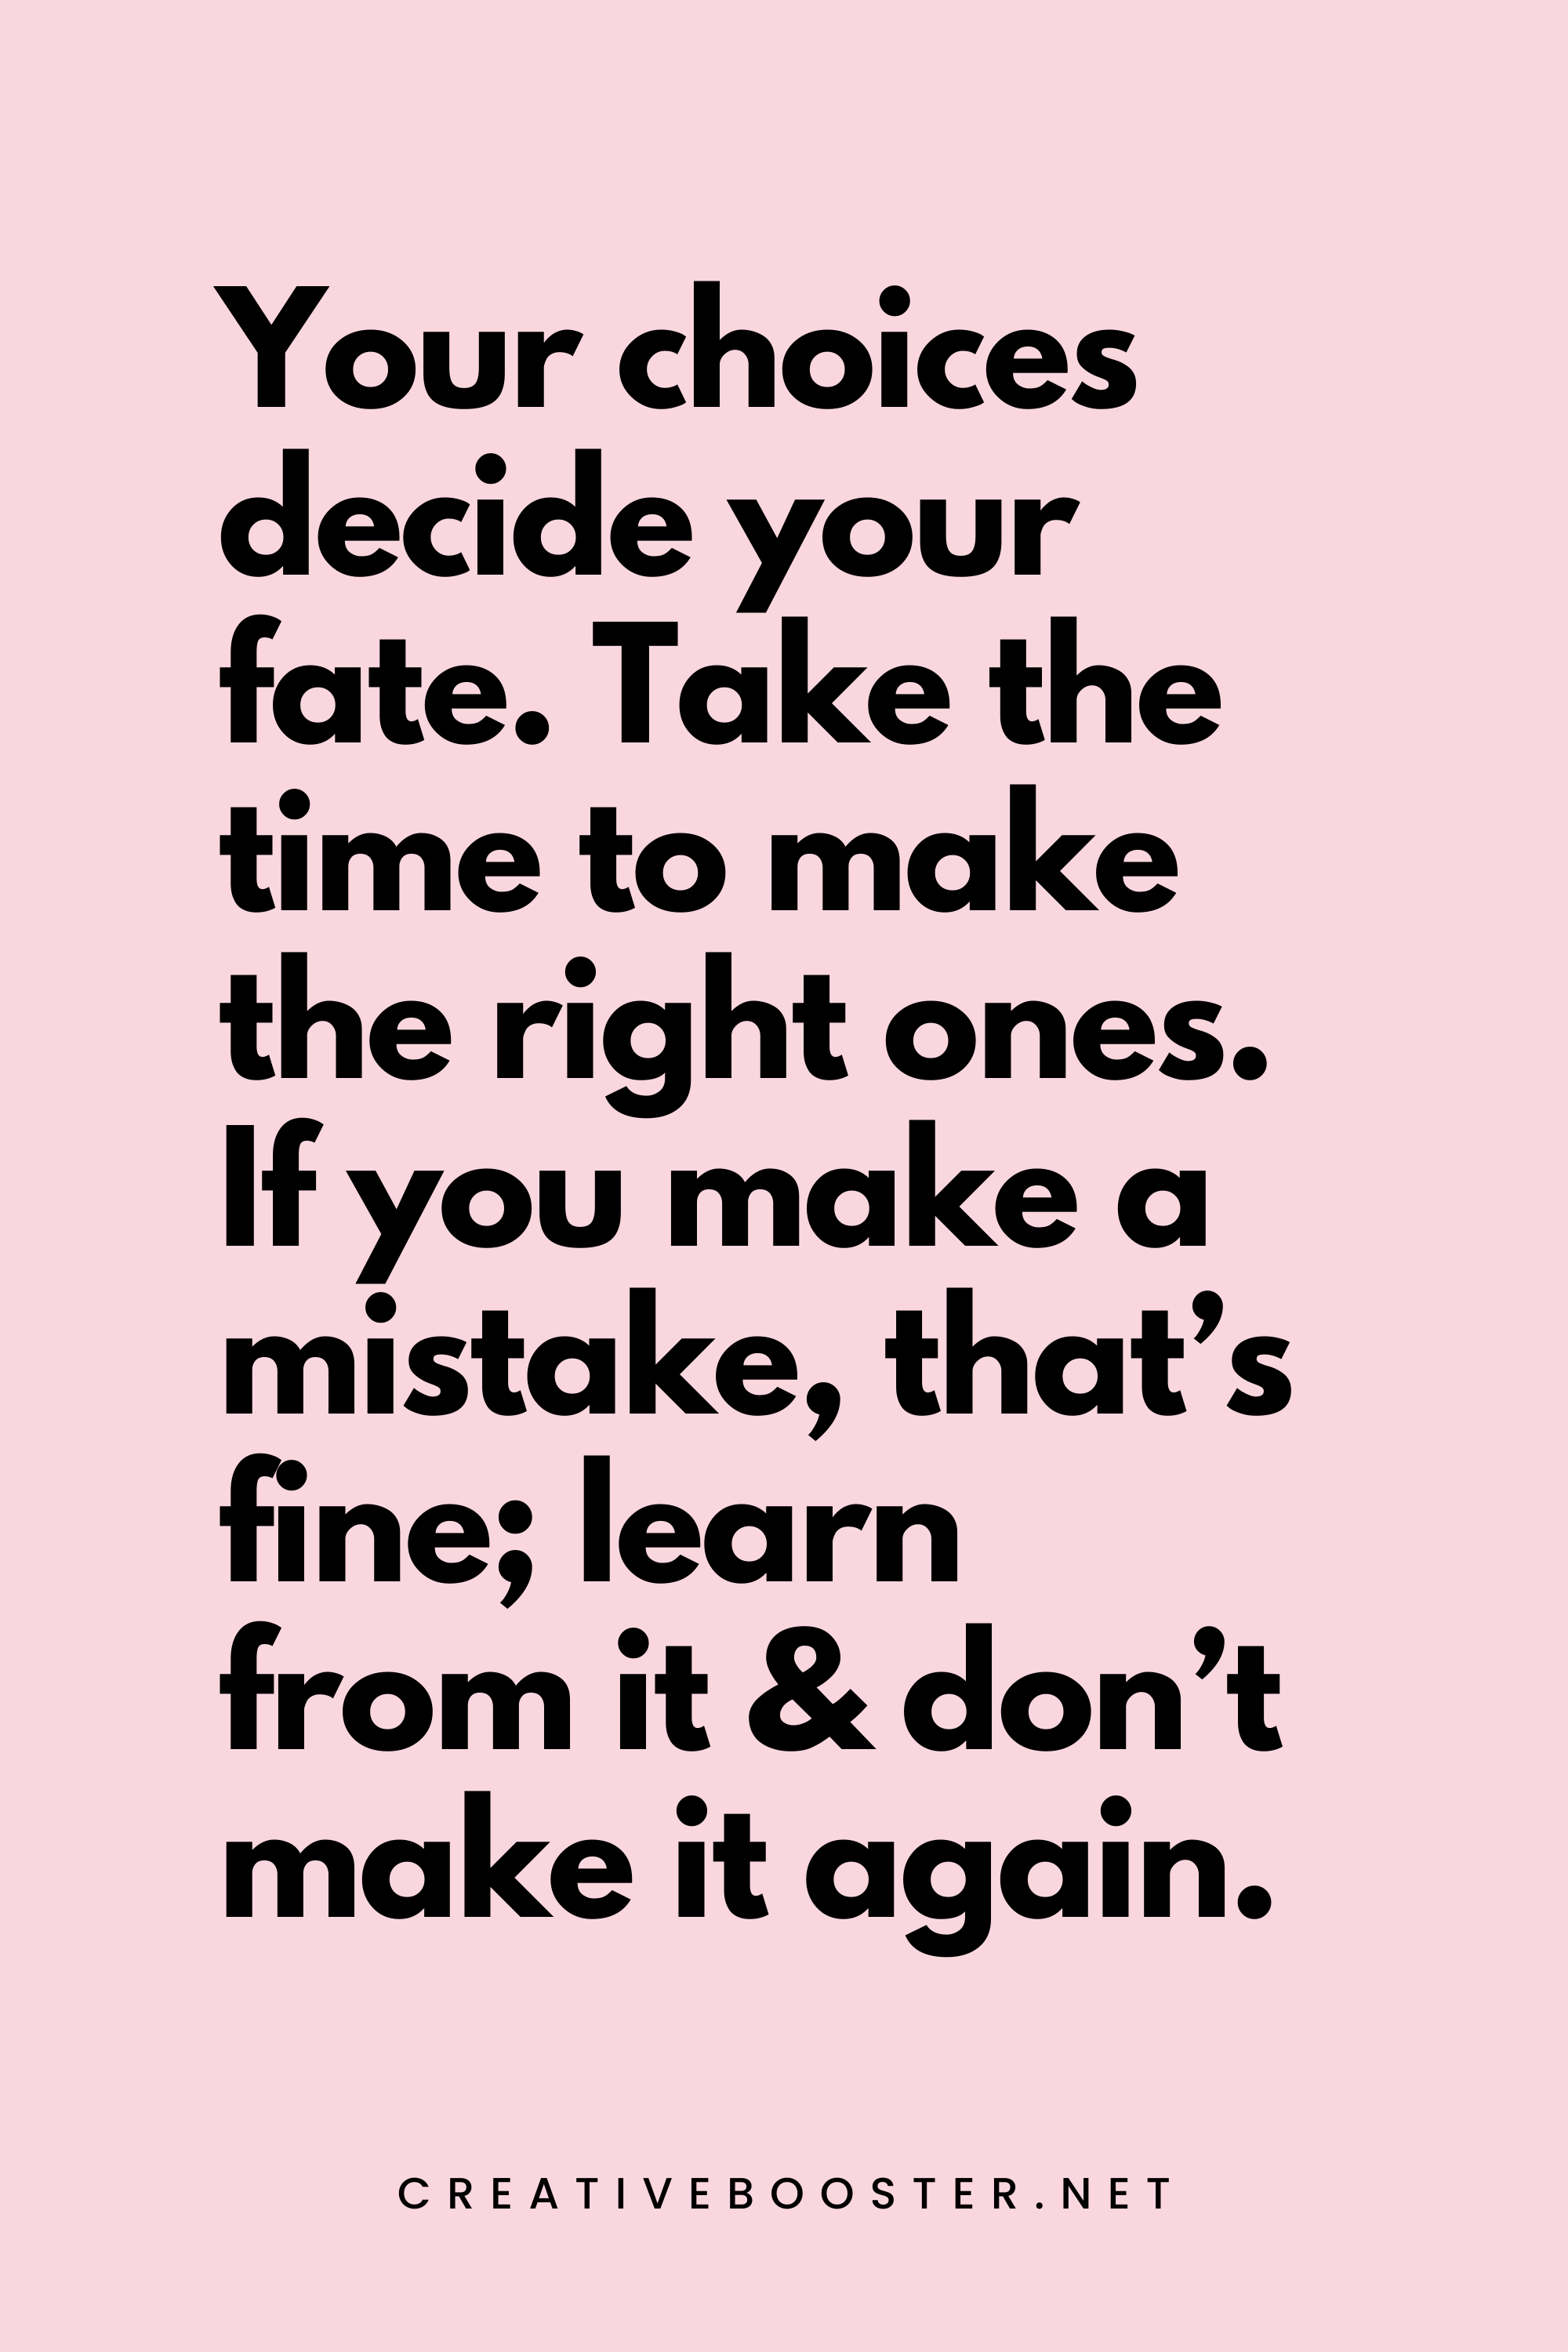 71. Your choices decide your fate. Take the time to make the right ones. If you make a mistake, that’s fine; learn from it & don’t make it again. - Robert Kiyosaki - 7. Financial Freedom Quotes by Robert Kiyosaki